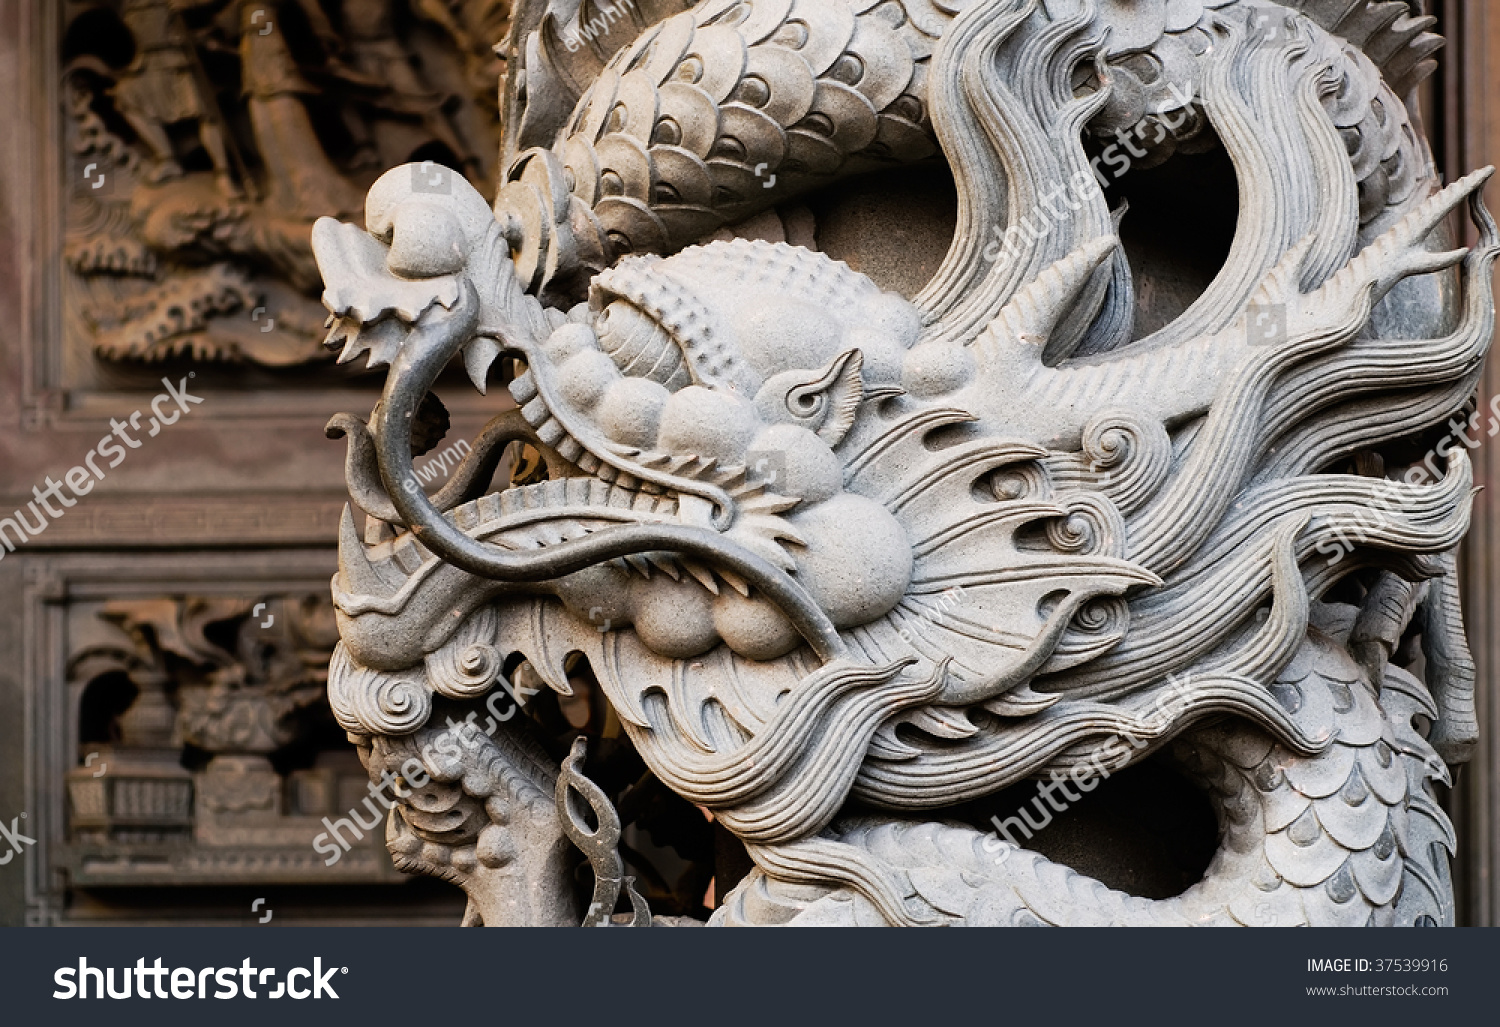 It Is A Stone Carving Of Taiwan. The Stone Dragon Was Carved In Pillars ...